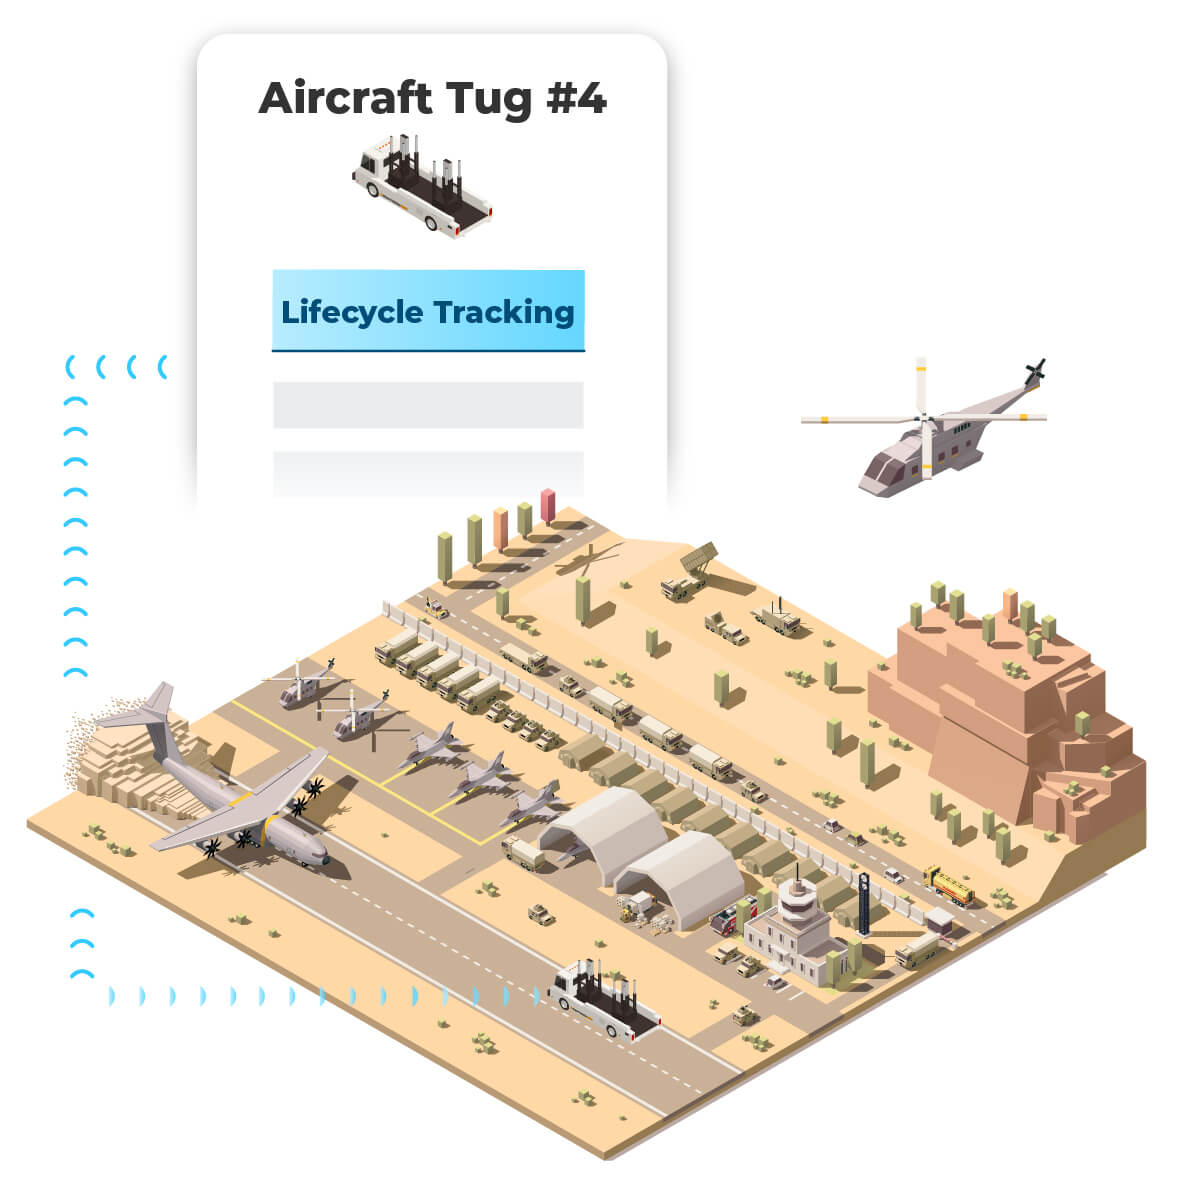 asset lifecycle management on government army base for an aircraft tug